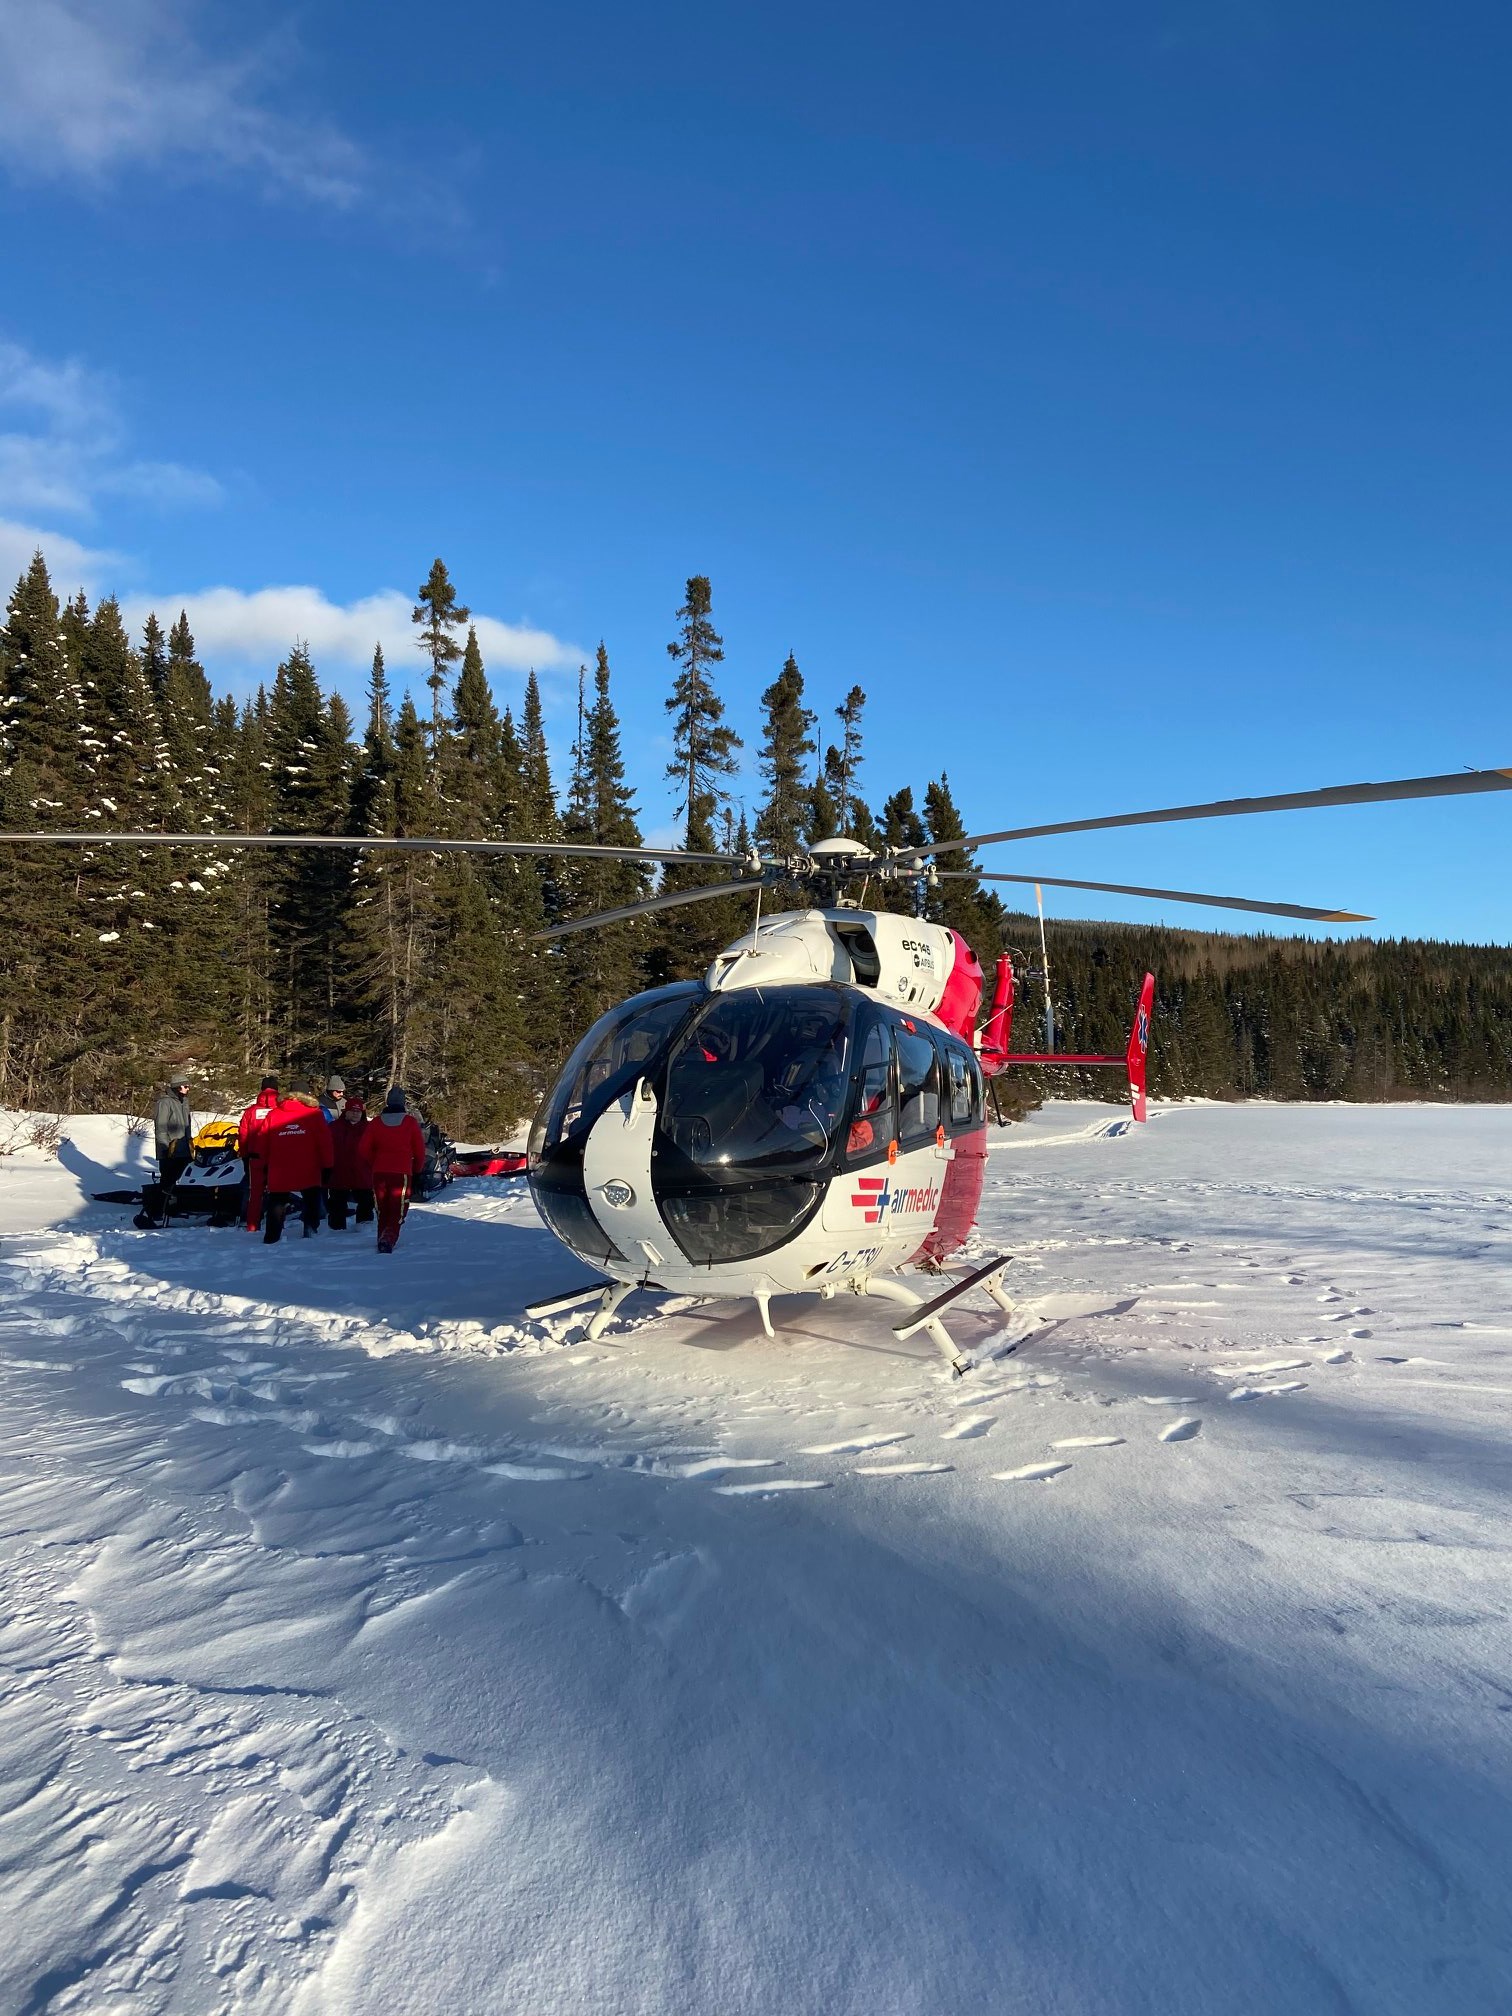 Quebec snowmobiler rescue provided by Air Medic helicopter flights to nearest hospital.